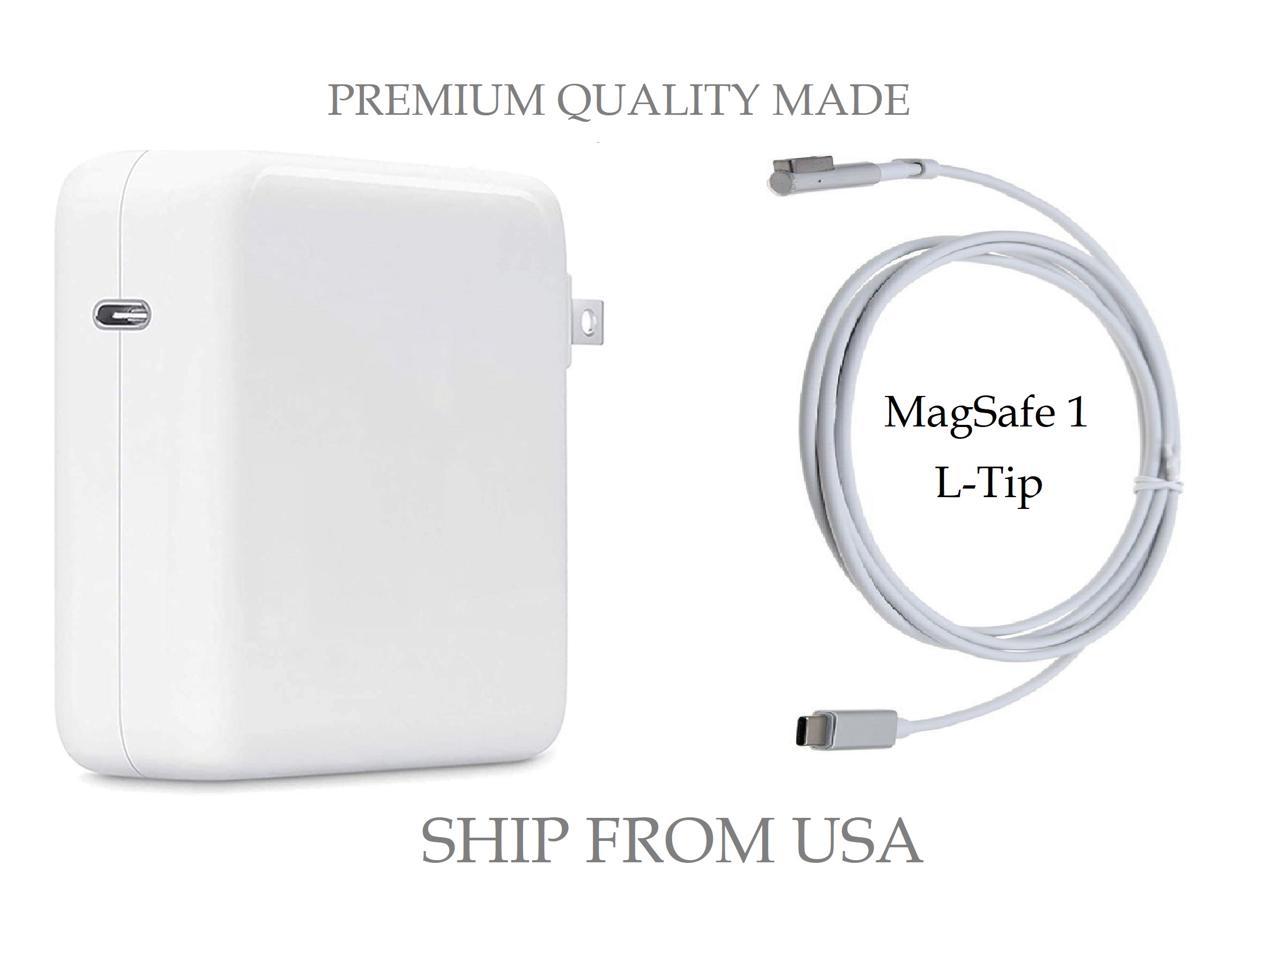 2 charging cable for macbook air